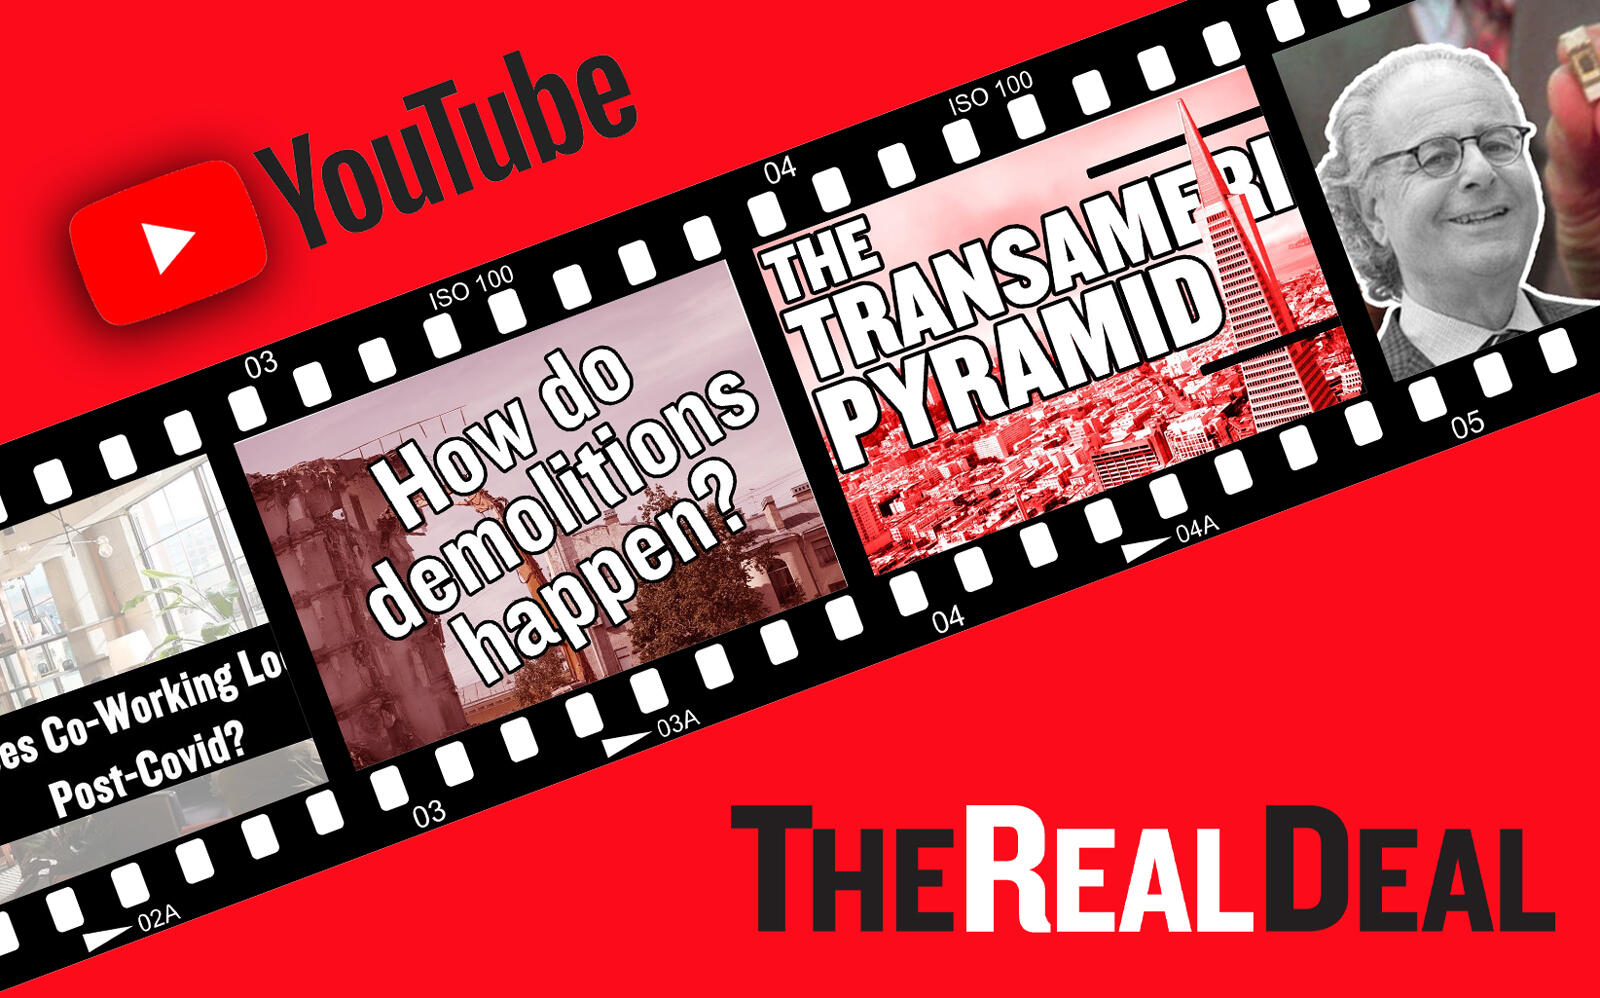 Subscribe to The Real Deal's YouTube channel for unparalleled, comprehensive multimedia coverage on all things real estate